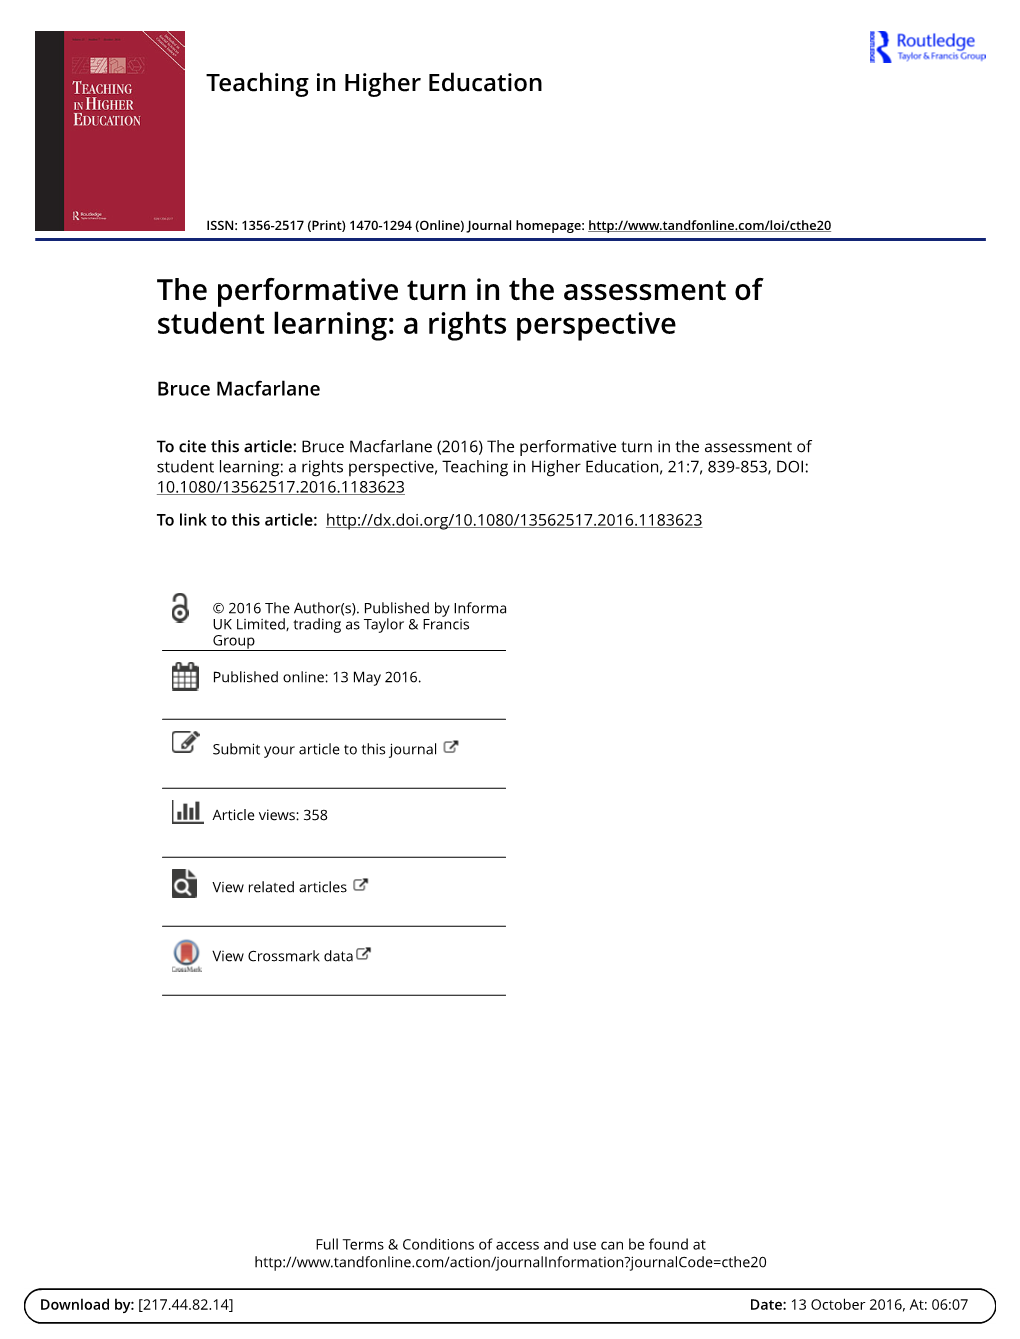 The Performative Turn in the Assessment of Student Learning: a Rights Perspective